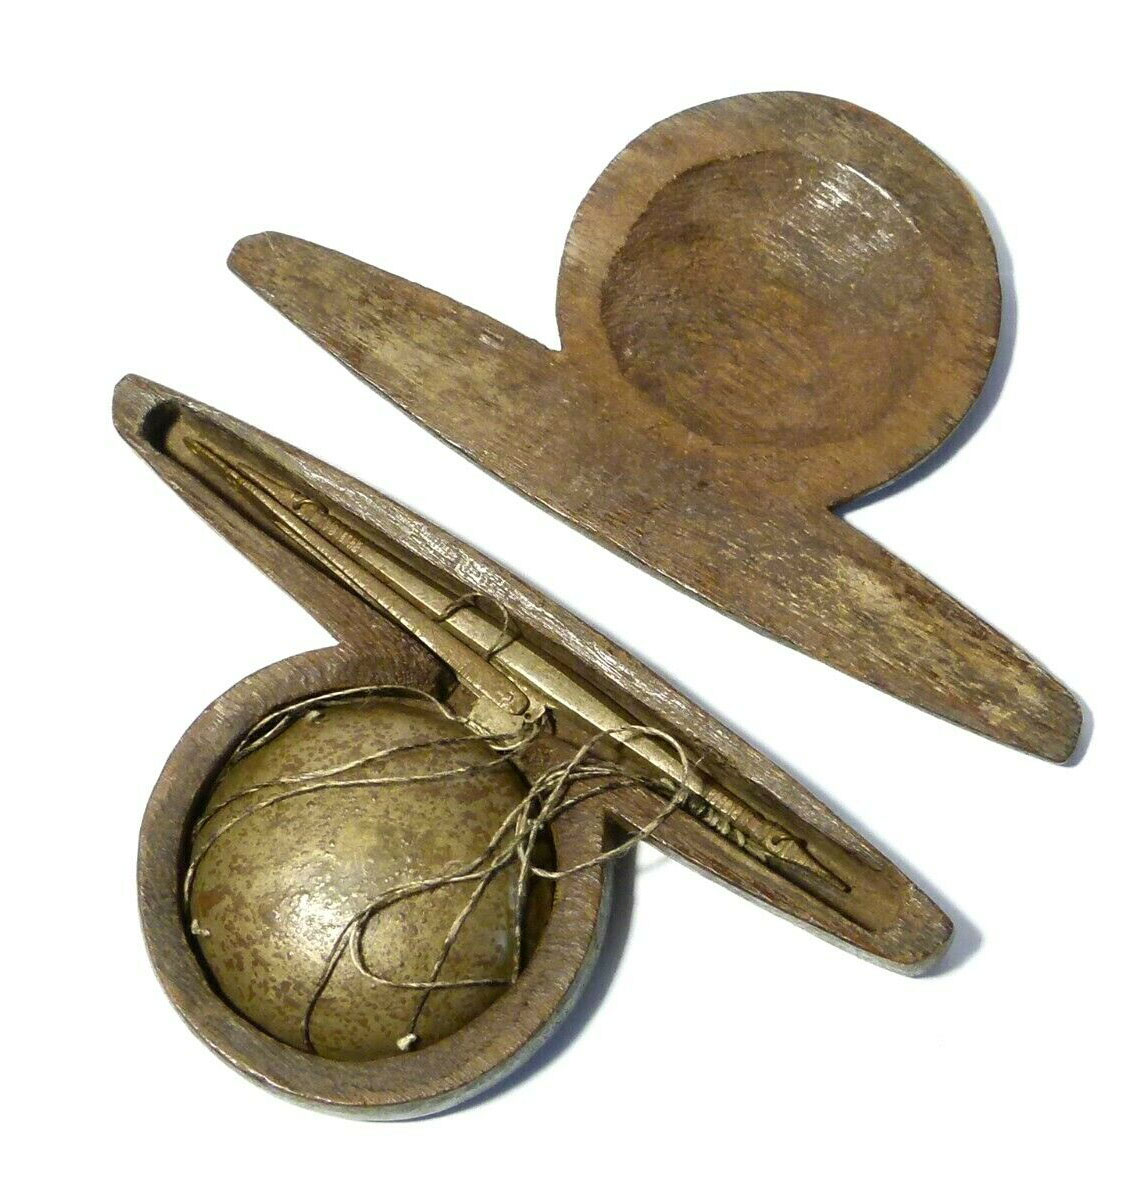 Asian Weighing Opium Scales in Wooden Case, 19th Century